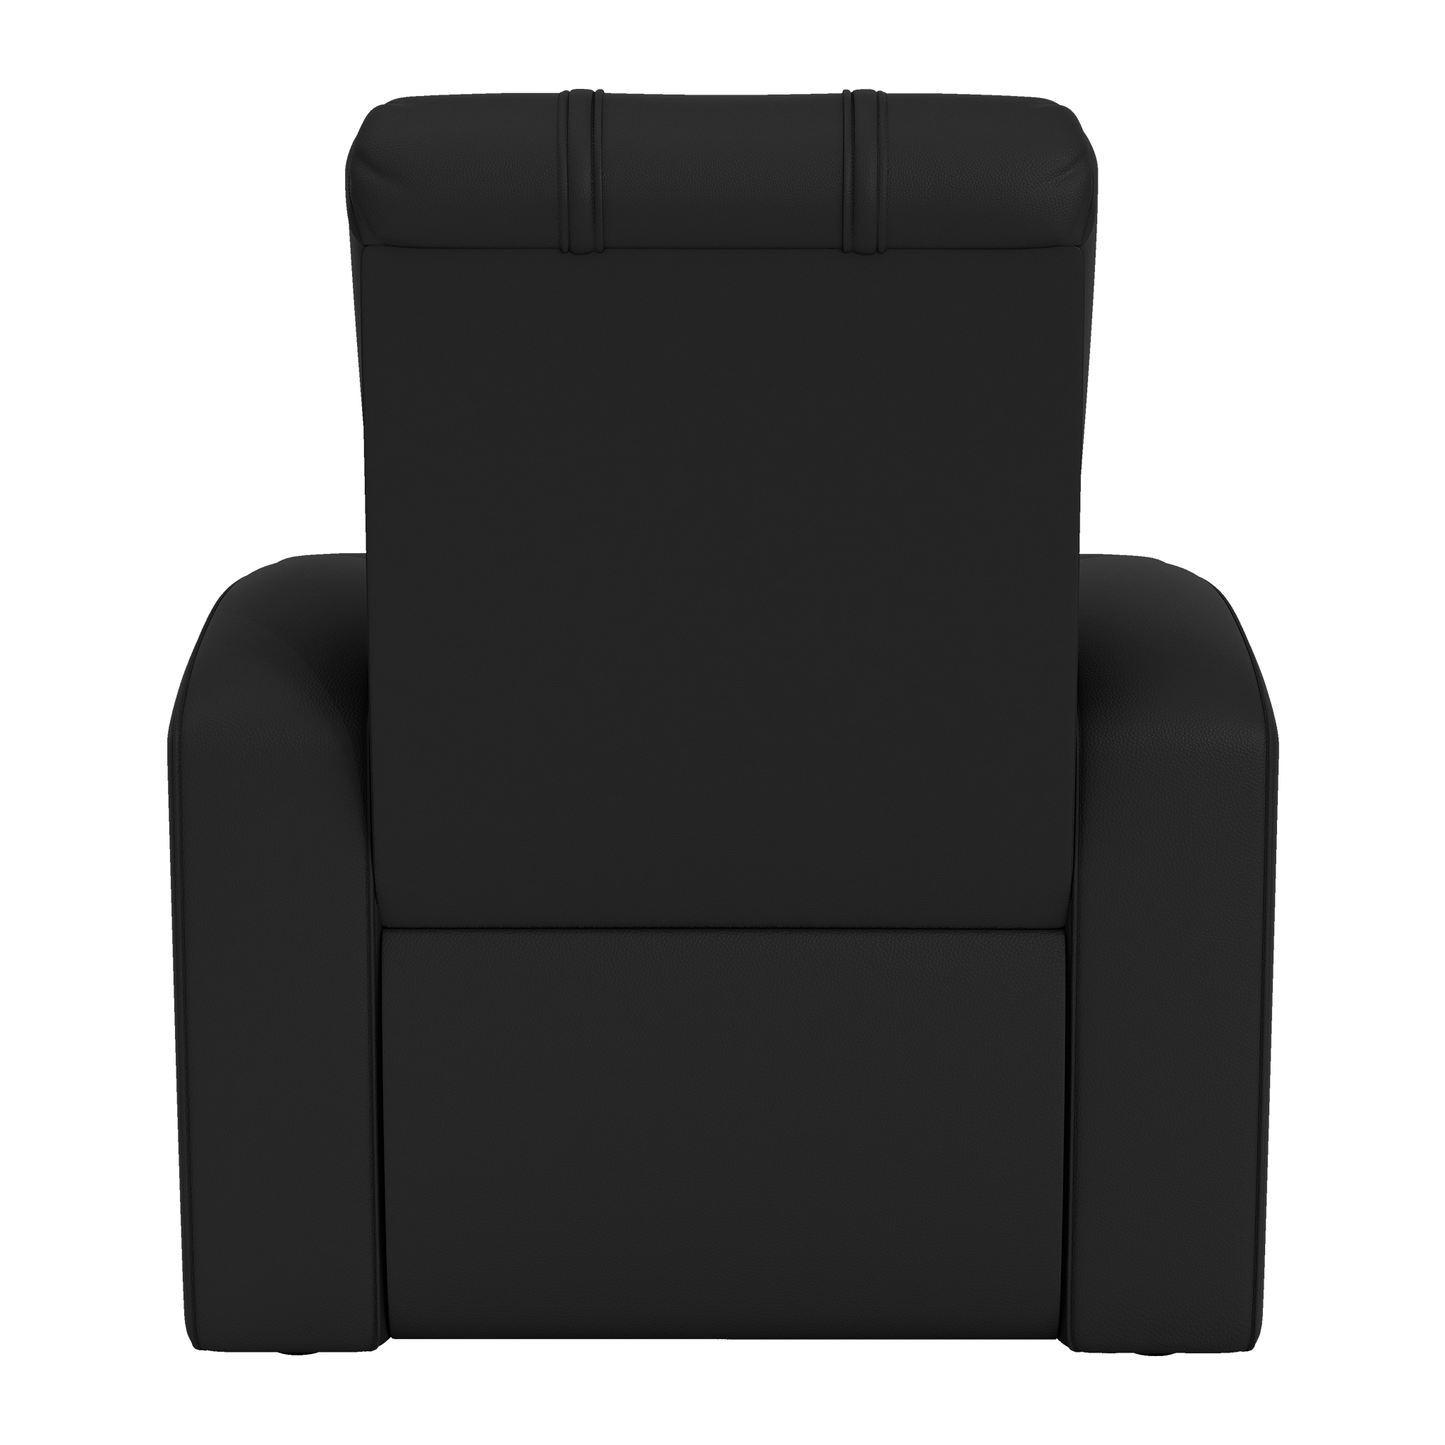 Relax Home Theater Recliner with Billiards Logo Panel